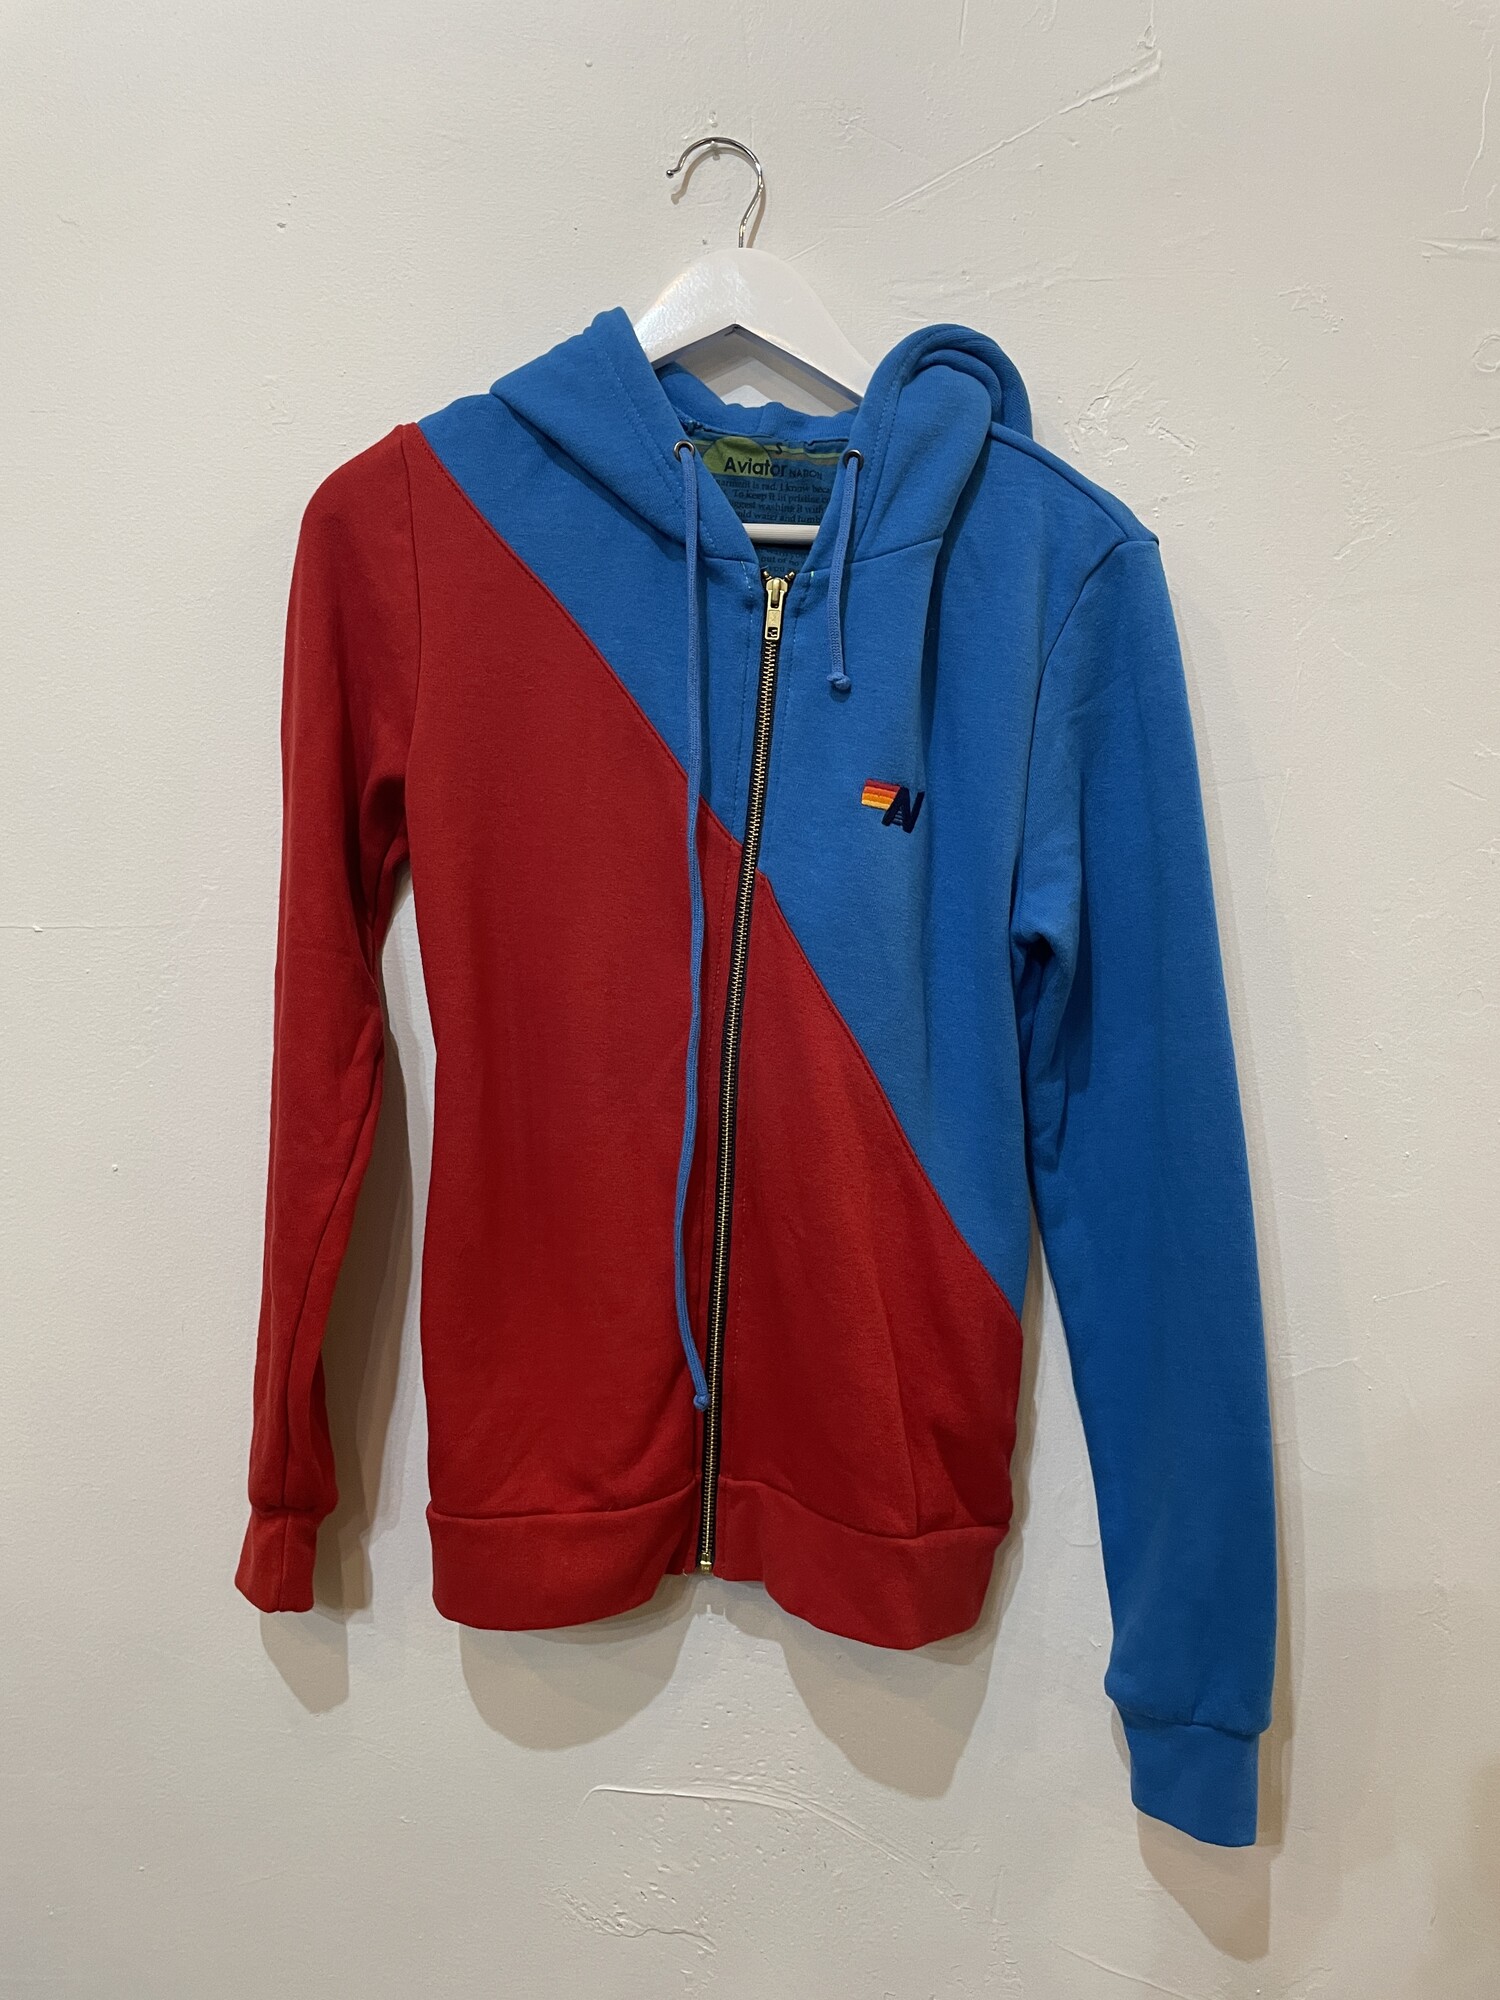 Aviator Nation Zip Hoodie<br />
Red, Blue<br />
small